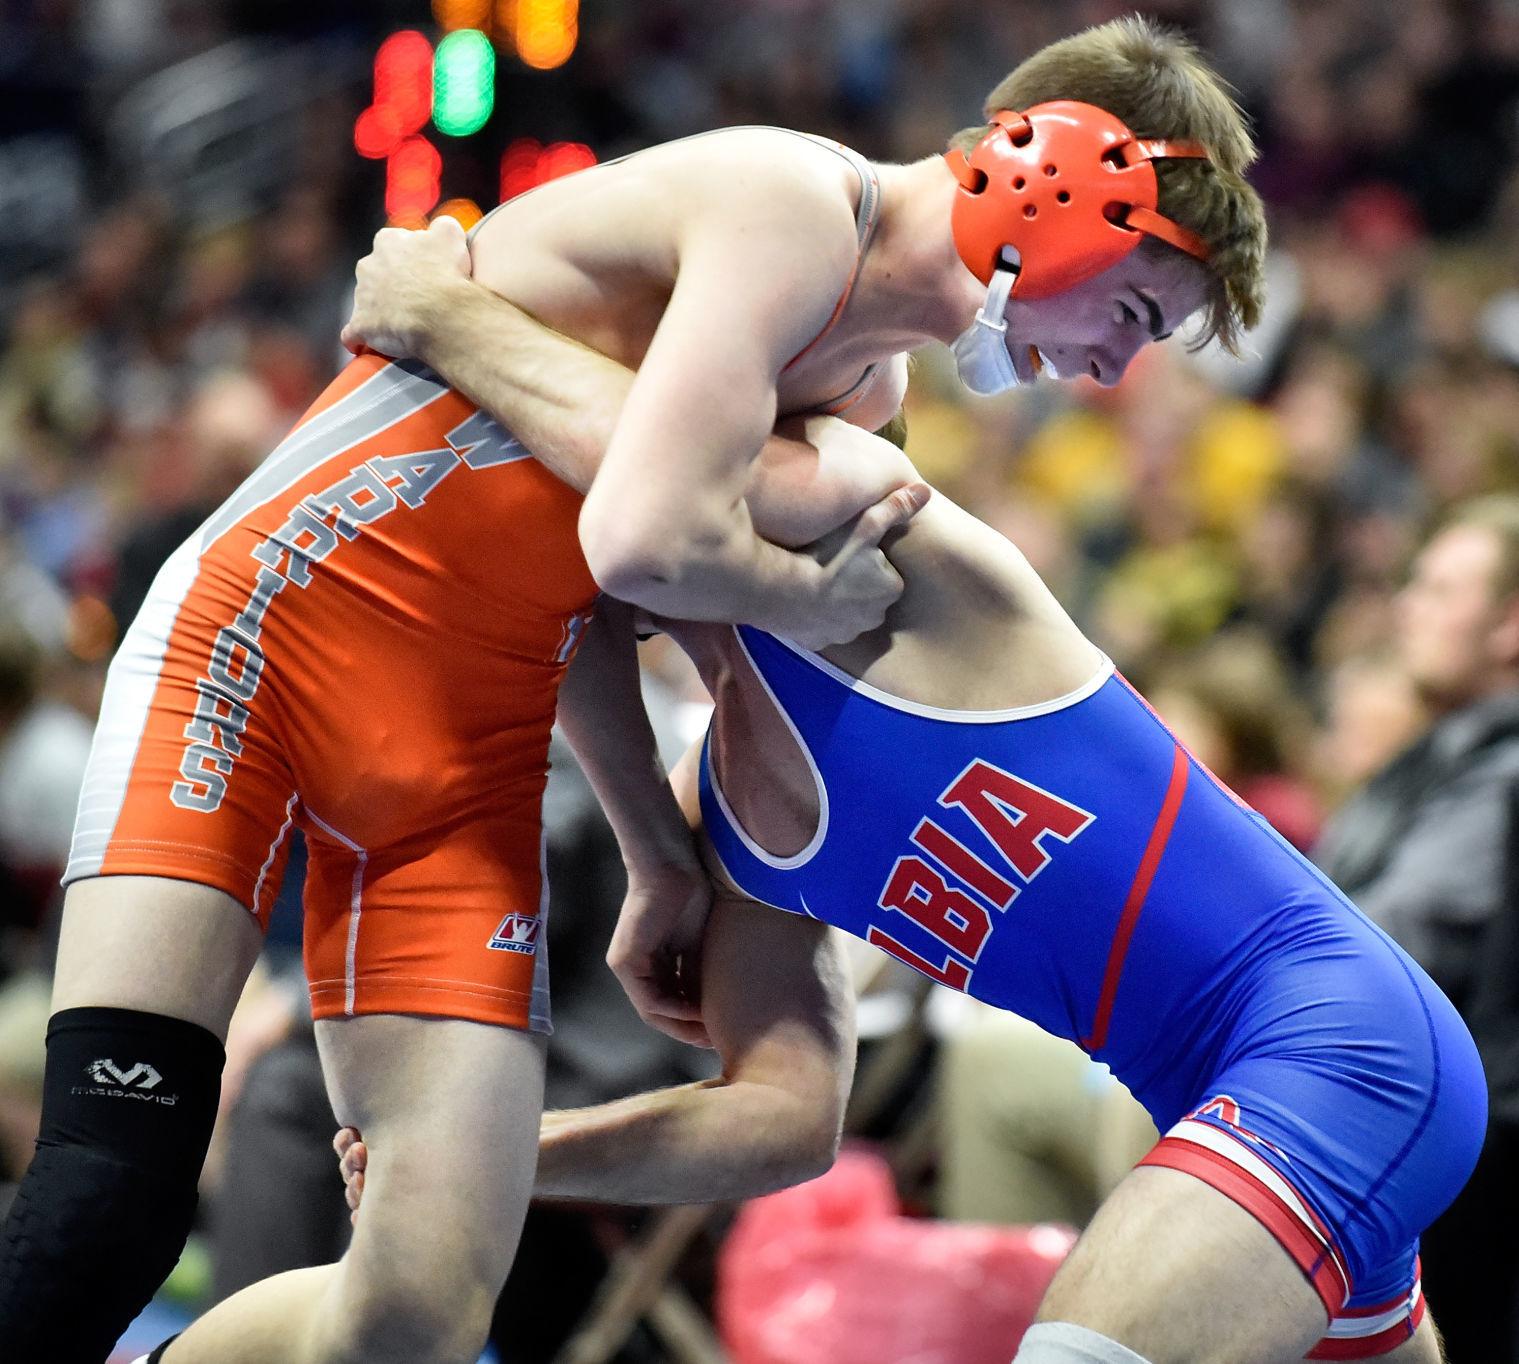 PHOTOS 10 years of Iowa state wrestling tournaments High School